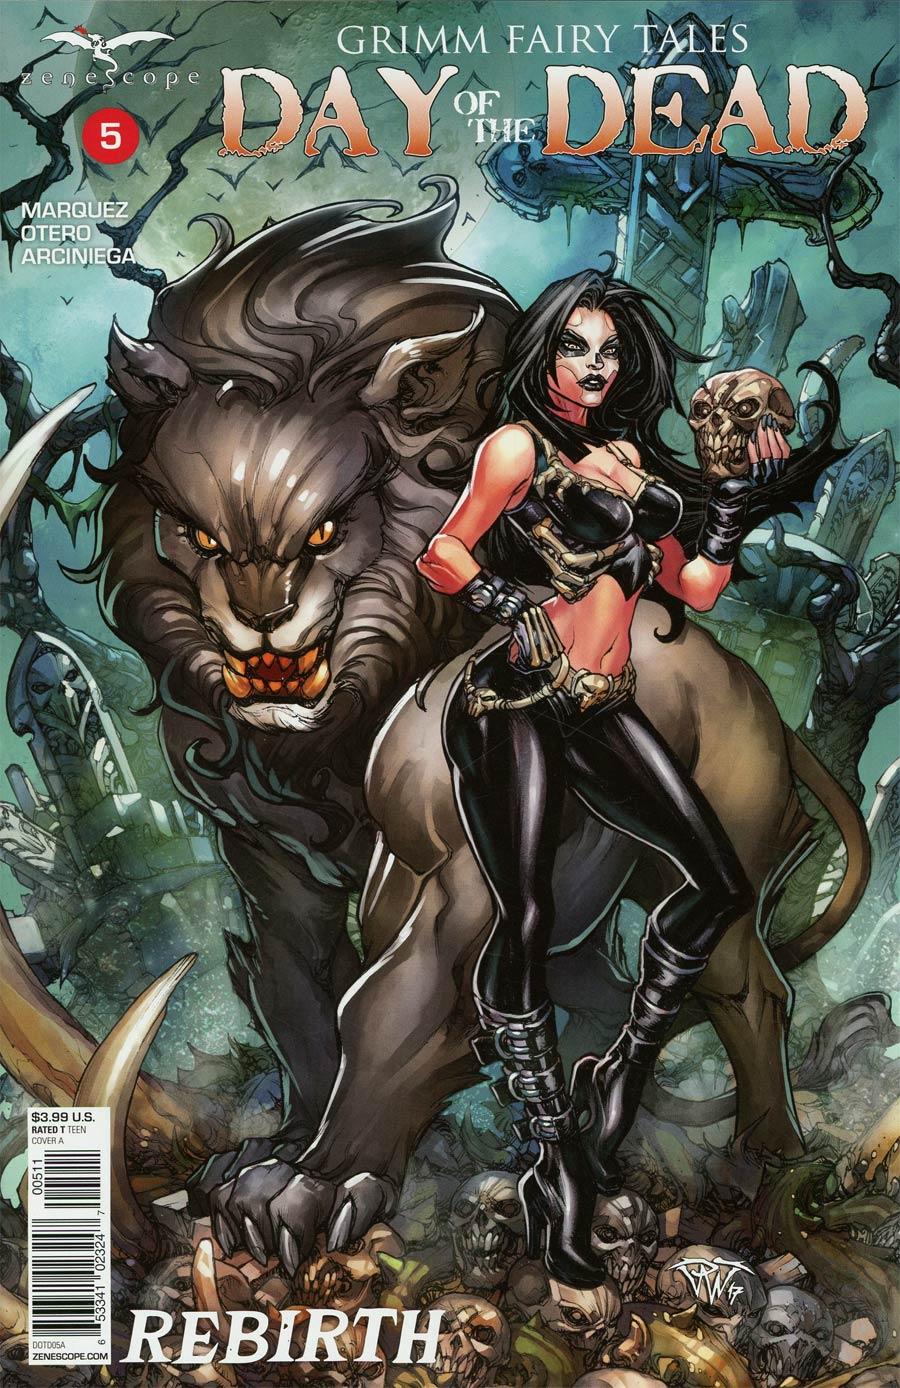 Grimm Fairy Tales Presents Day Of The Dead Vol. 1 #5